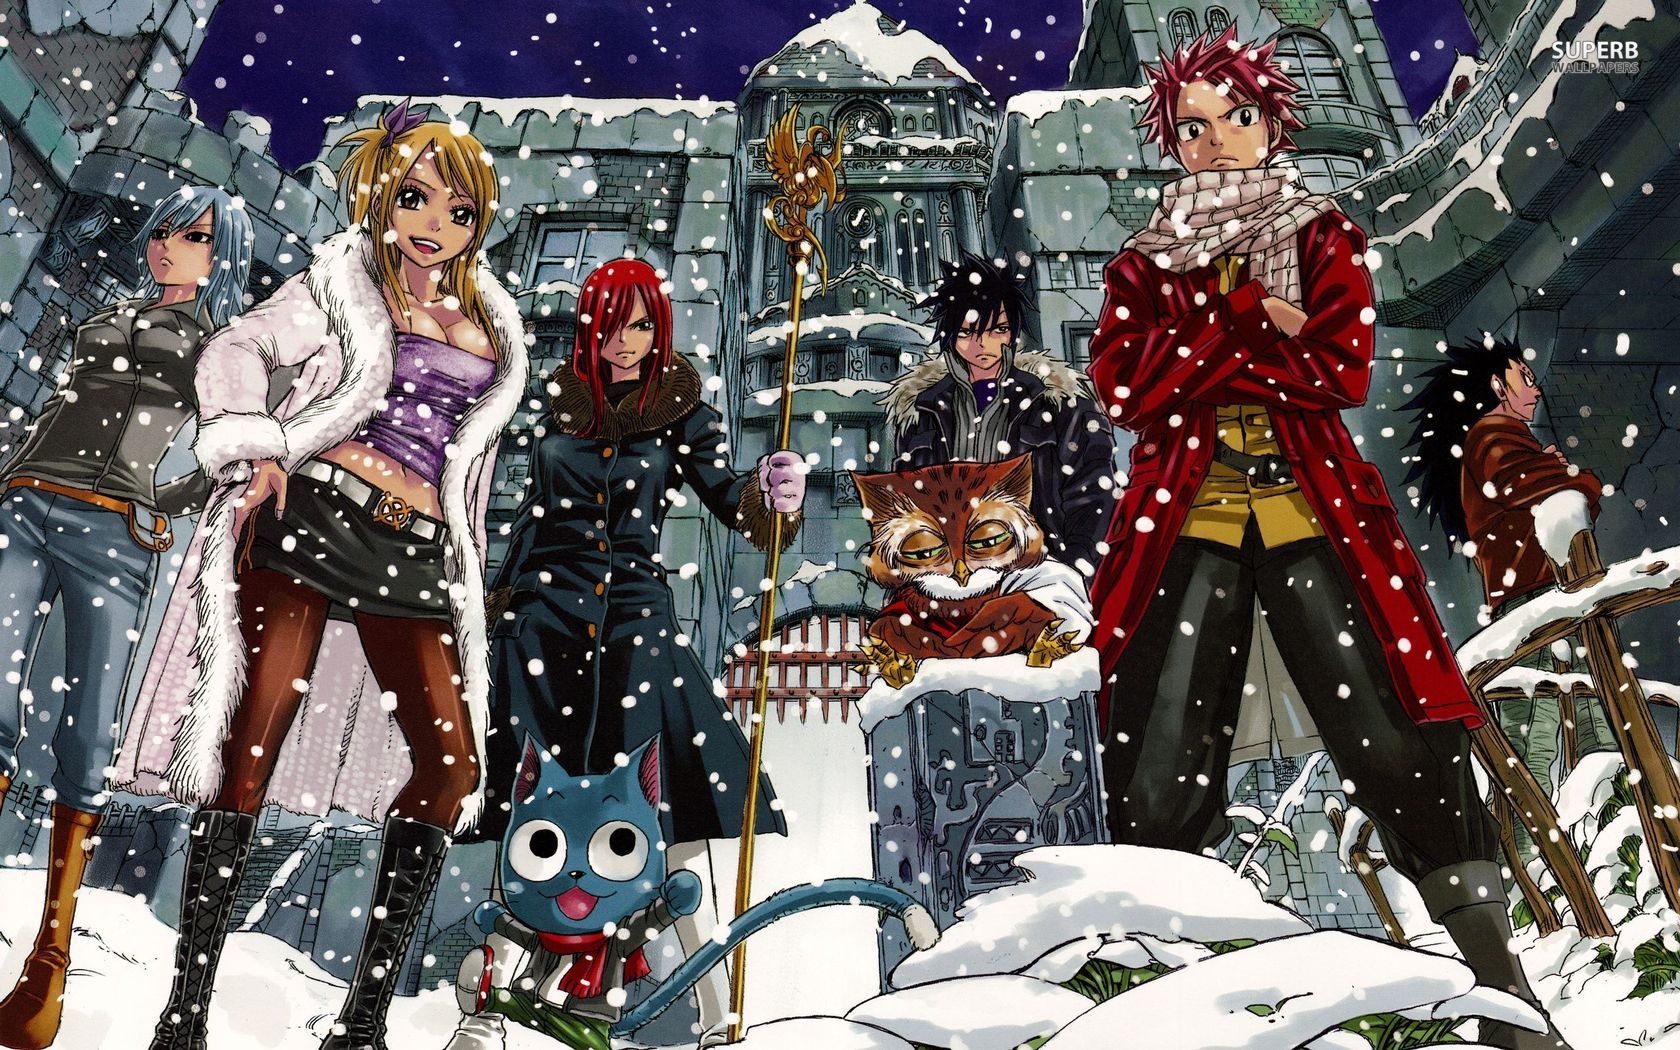 Fairy Tail wallpaper - Anime wallpapers